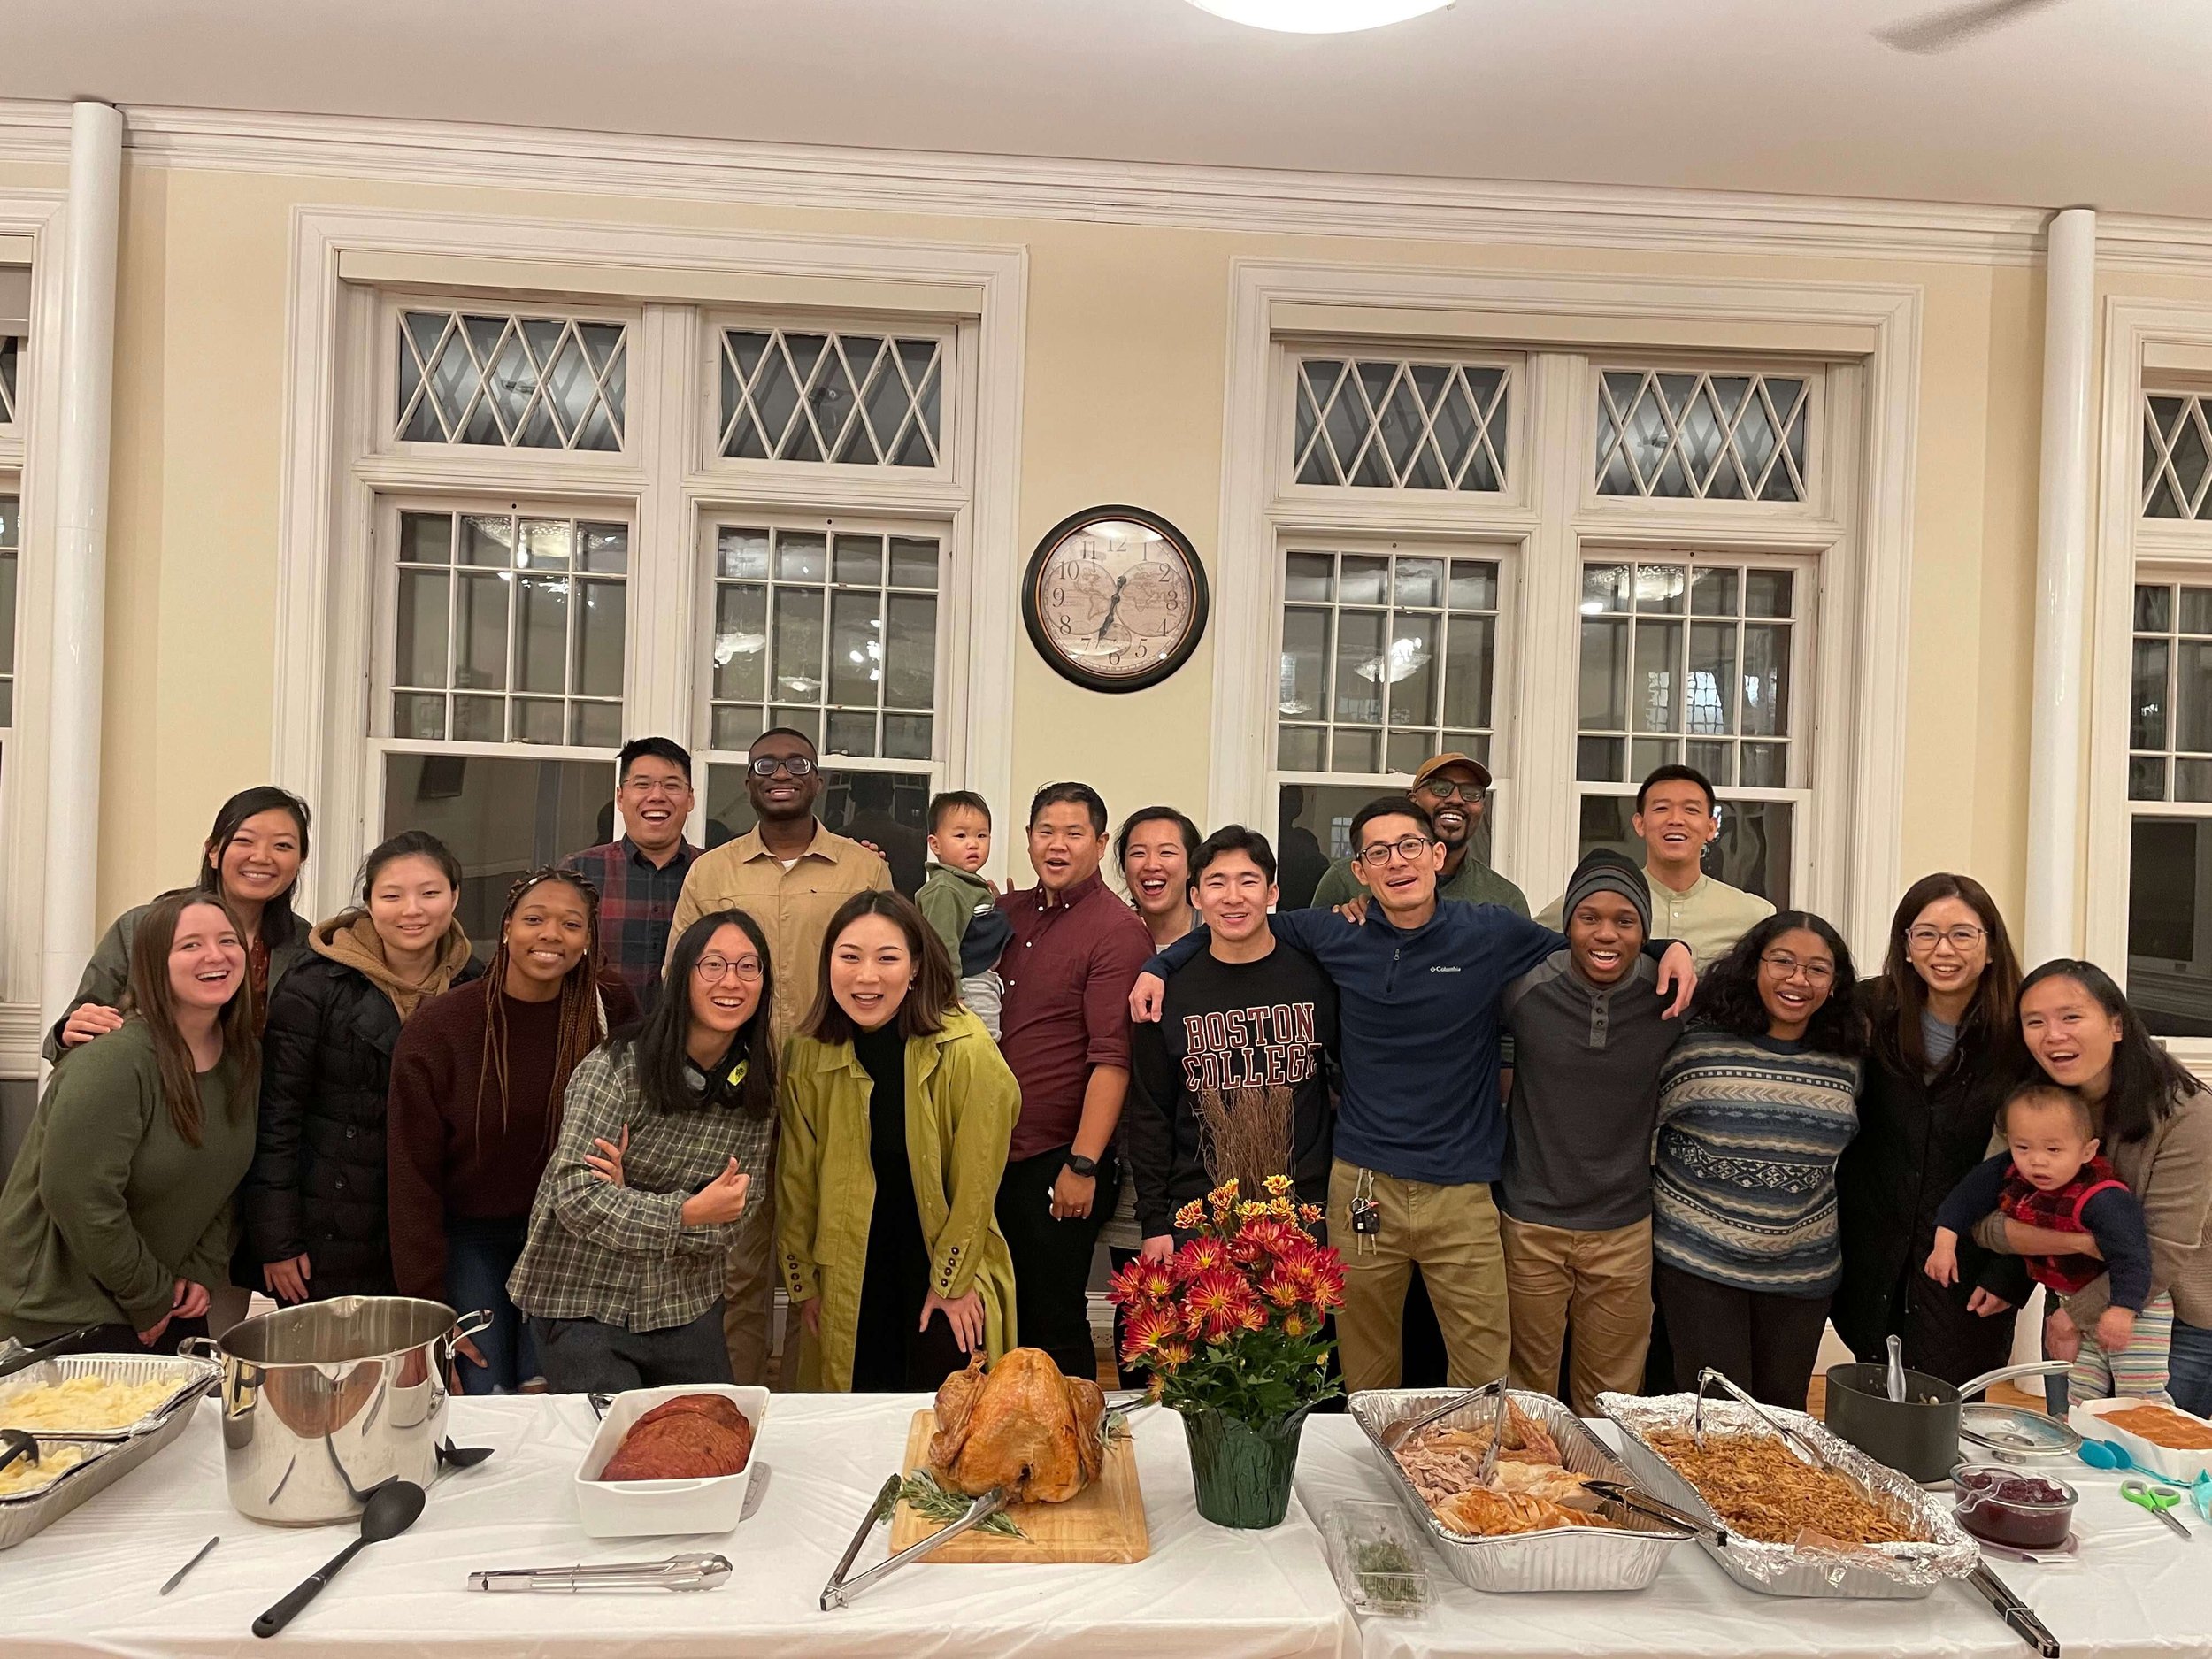 Aurona and Daniel having a Thanksgiving dinner with other Brown University mentors and mentees